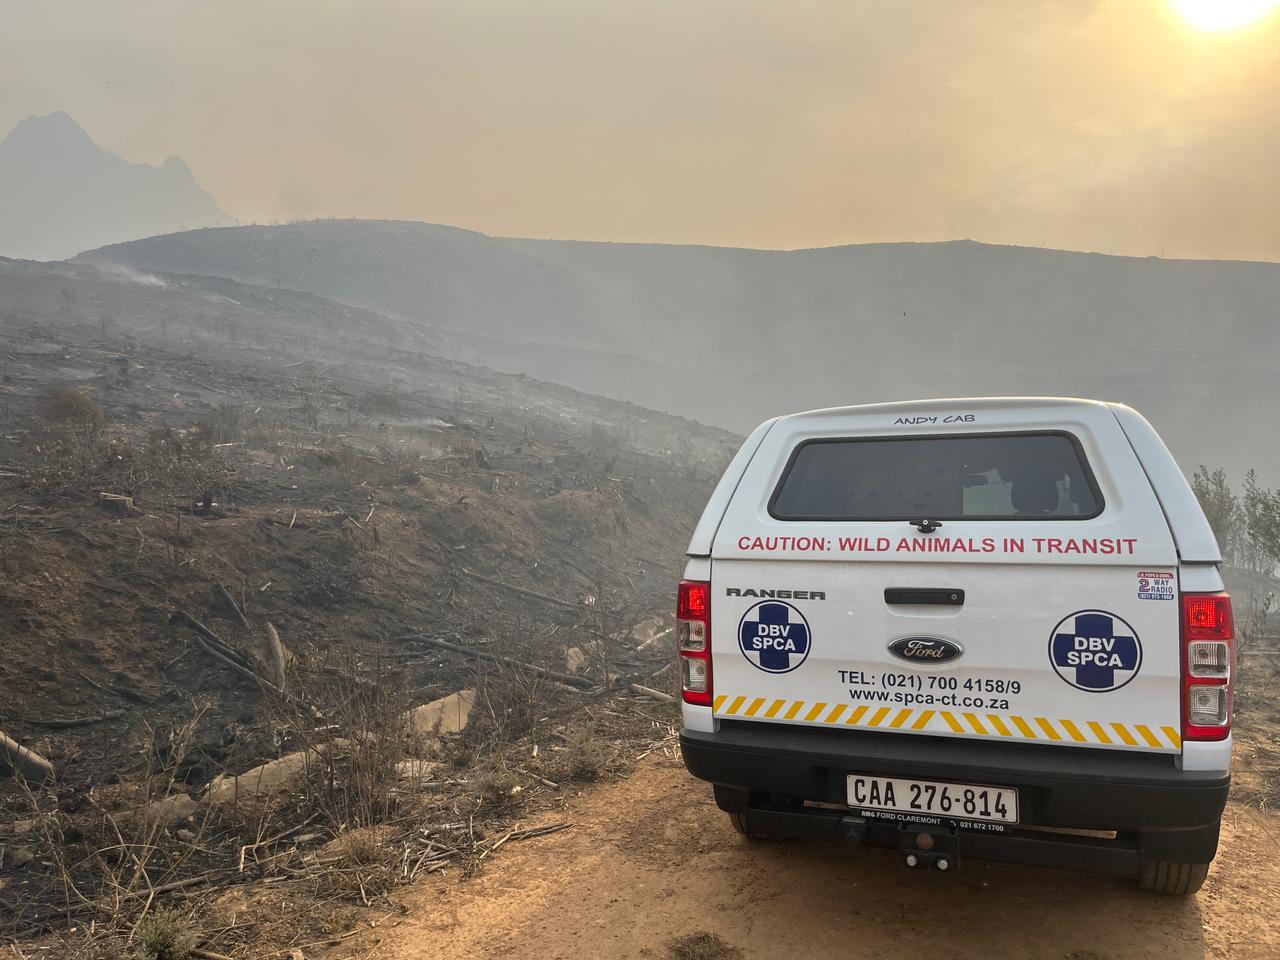 SPCA conducts wildlife search and rescue after fires in Cape Town